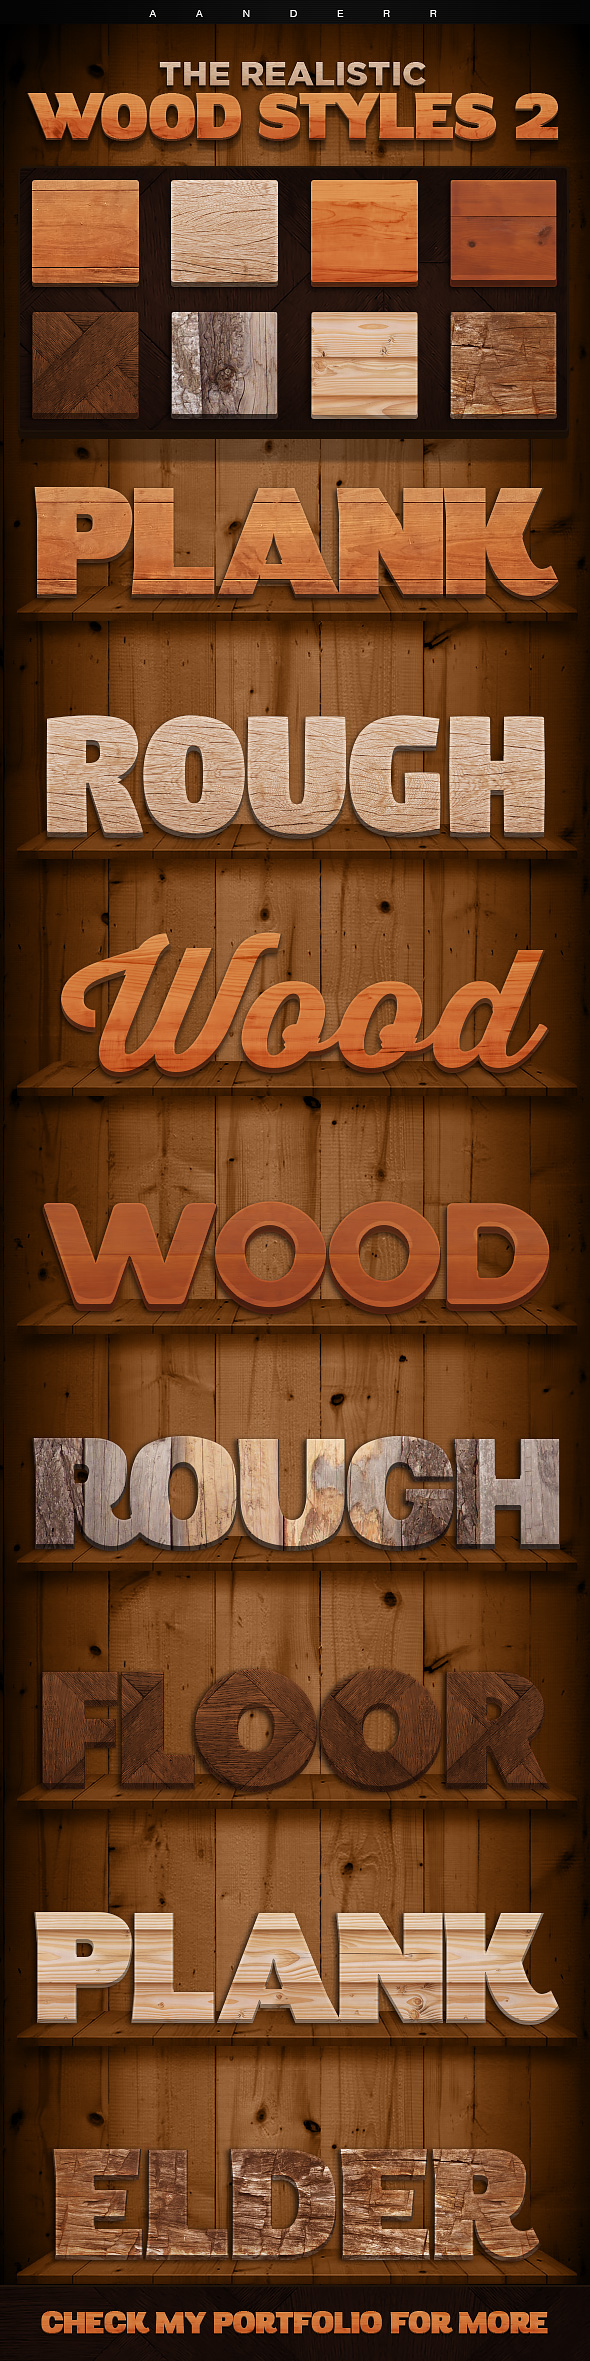 The Realistic Wood Styles 2